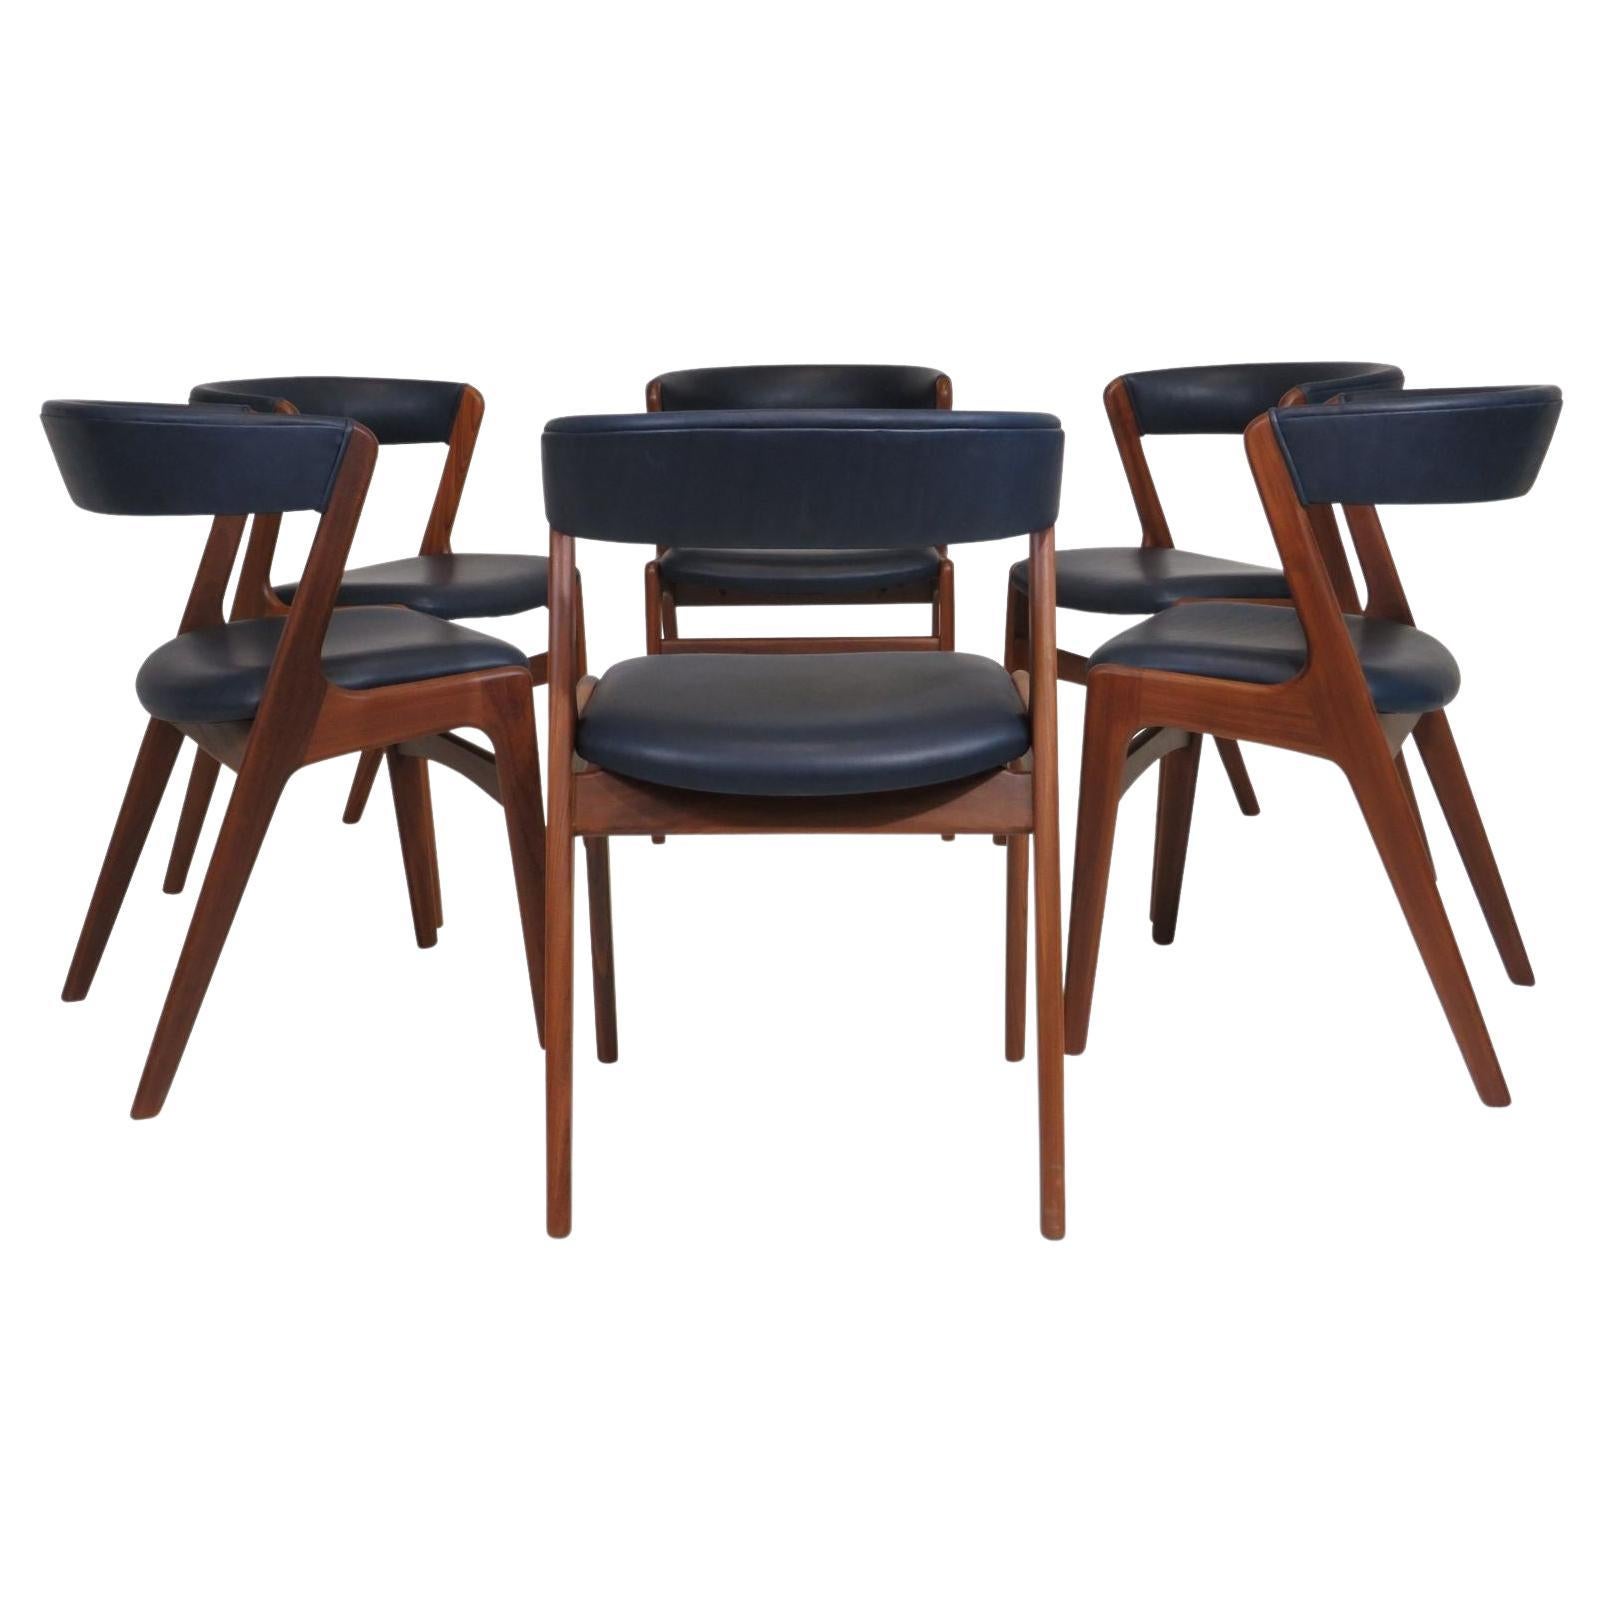 Kai Kristiansen Curved Back Dining Chairs in Navy Leather ( 80 chairs available)